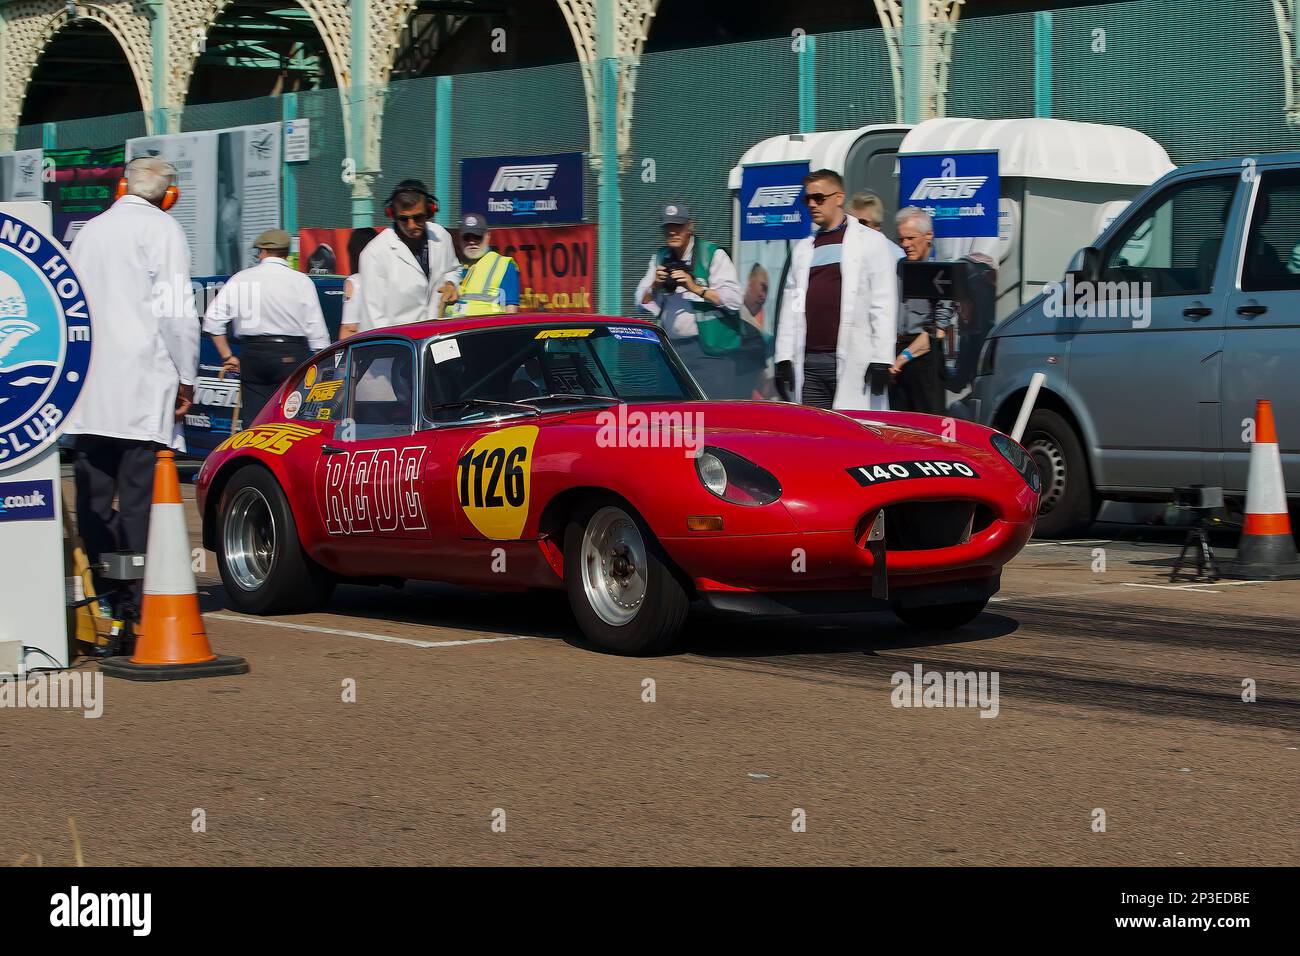 Robert Oram driving a Jaguar E Type aka Jaguar XK-E at The Brighton National Speed Trials 2017. This is the oldest motor racing event in the UK and is held in the south east coastal town of Brighton. Madeira drive is a road which runs along the seafront and is normal full of people explorer the beach, pier and local attractions. Today it is turned in to a 1/4 time trial course. 2nd September 2017. Stock Photo